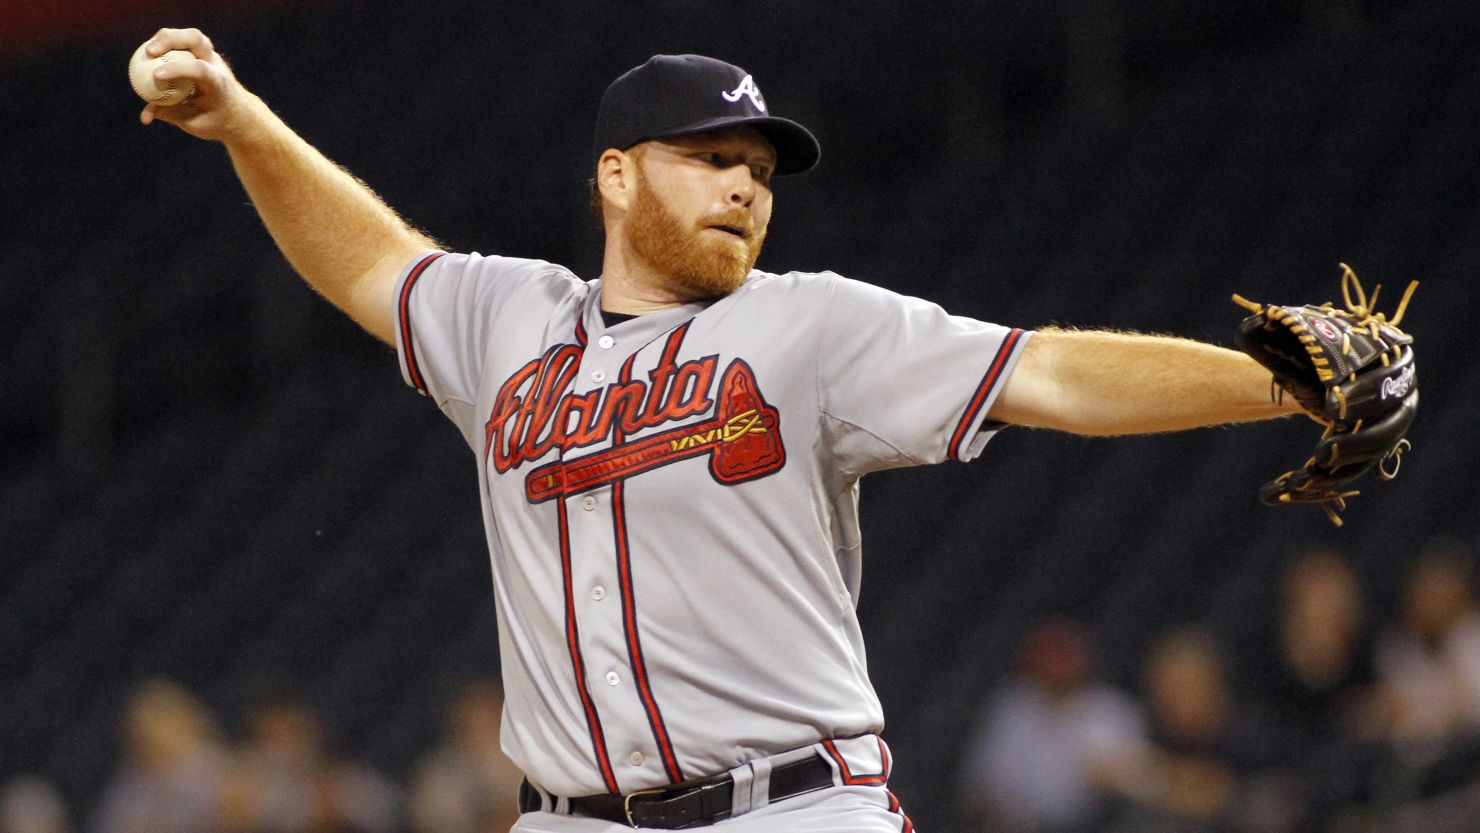 At 6-foot-6, Tommy Hanson earned the nickname "Big Red" among his fellow Braves.